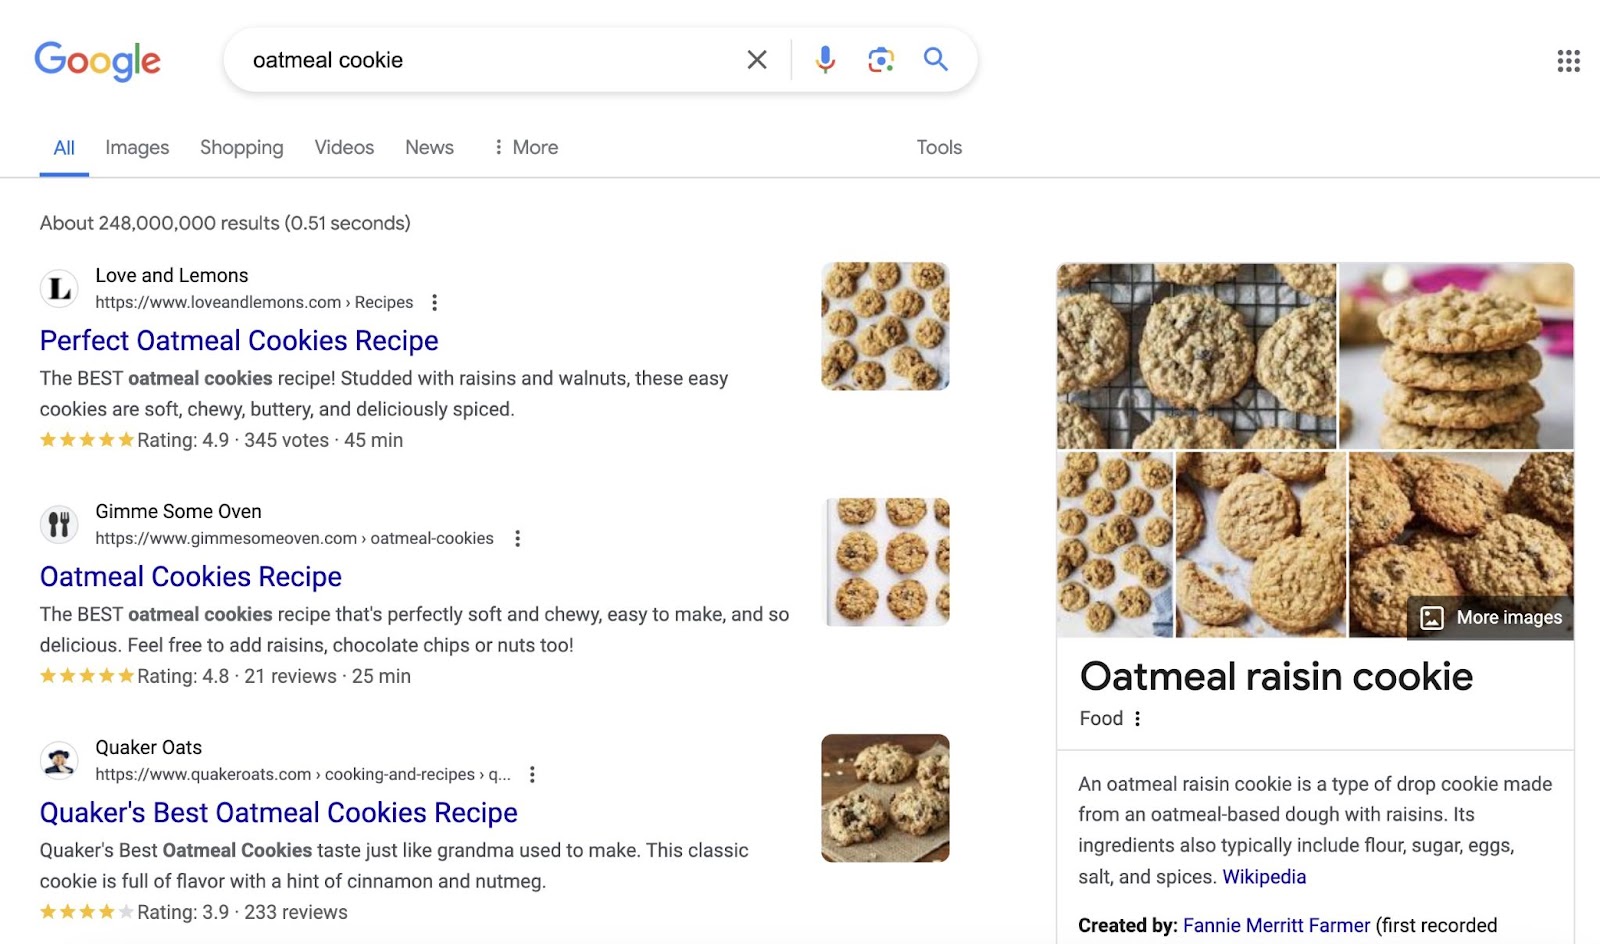 search results page for "oatmeal cookie" shows oatmeal cookie recipes ranking for top organic results